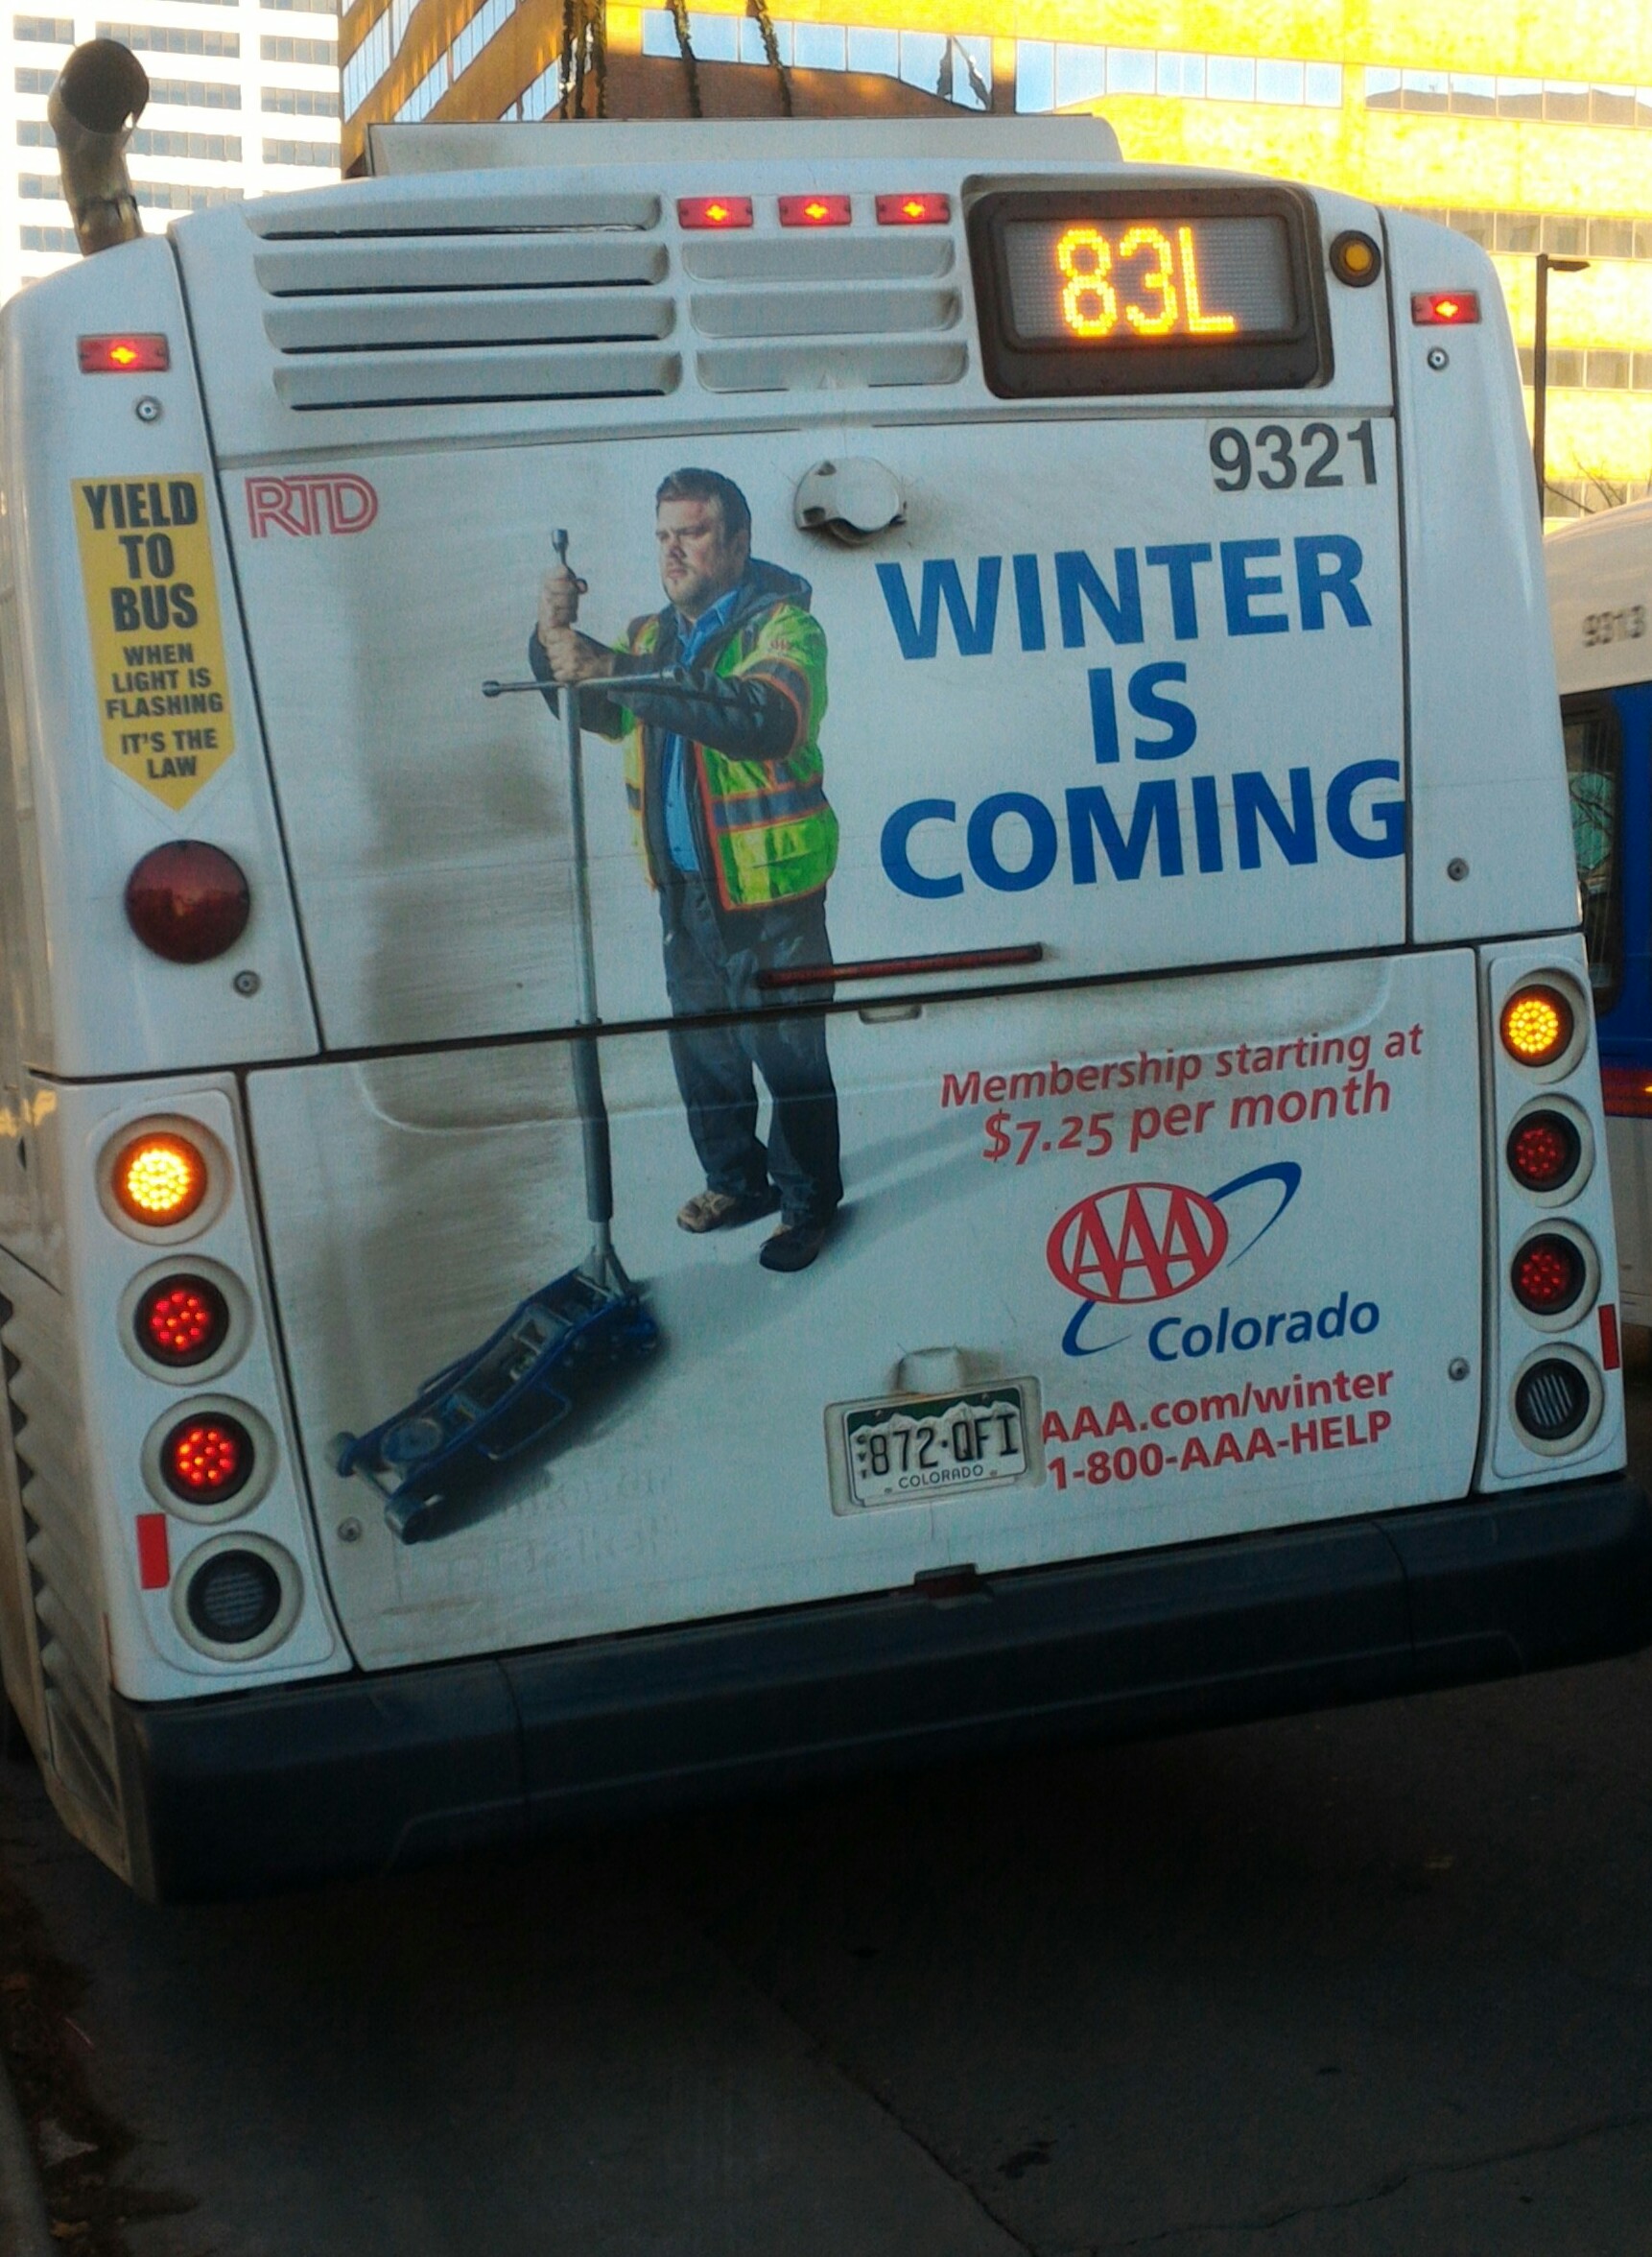 car - 83L 9321 Winter Bus Is Coming Membership starting at $7.25 per month Colorado S8TZOft Aaa.comwinter 1800AaaHelp